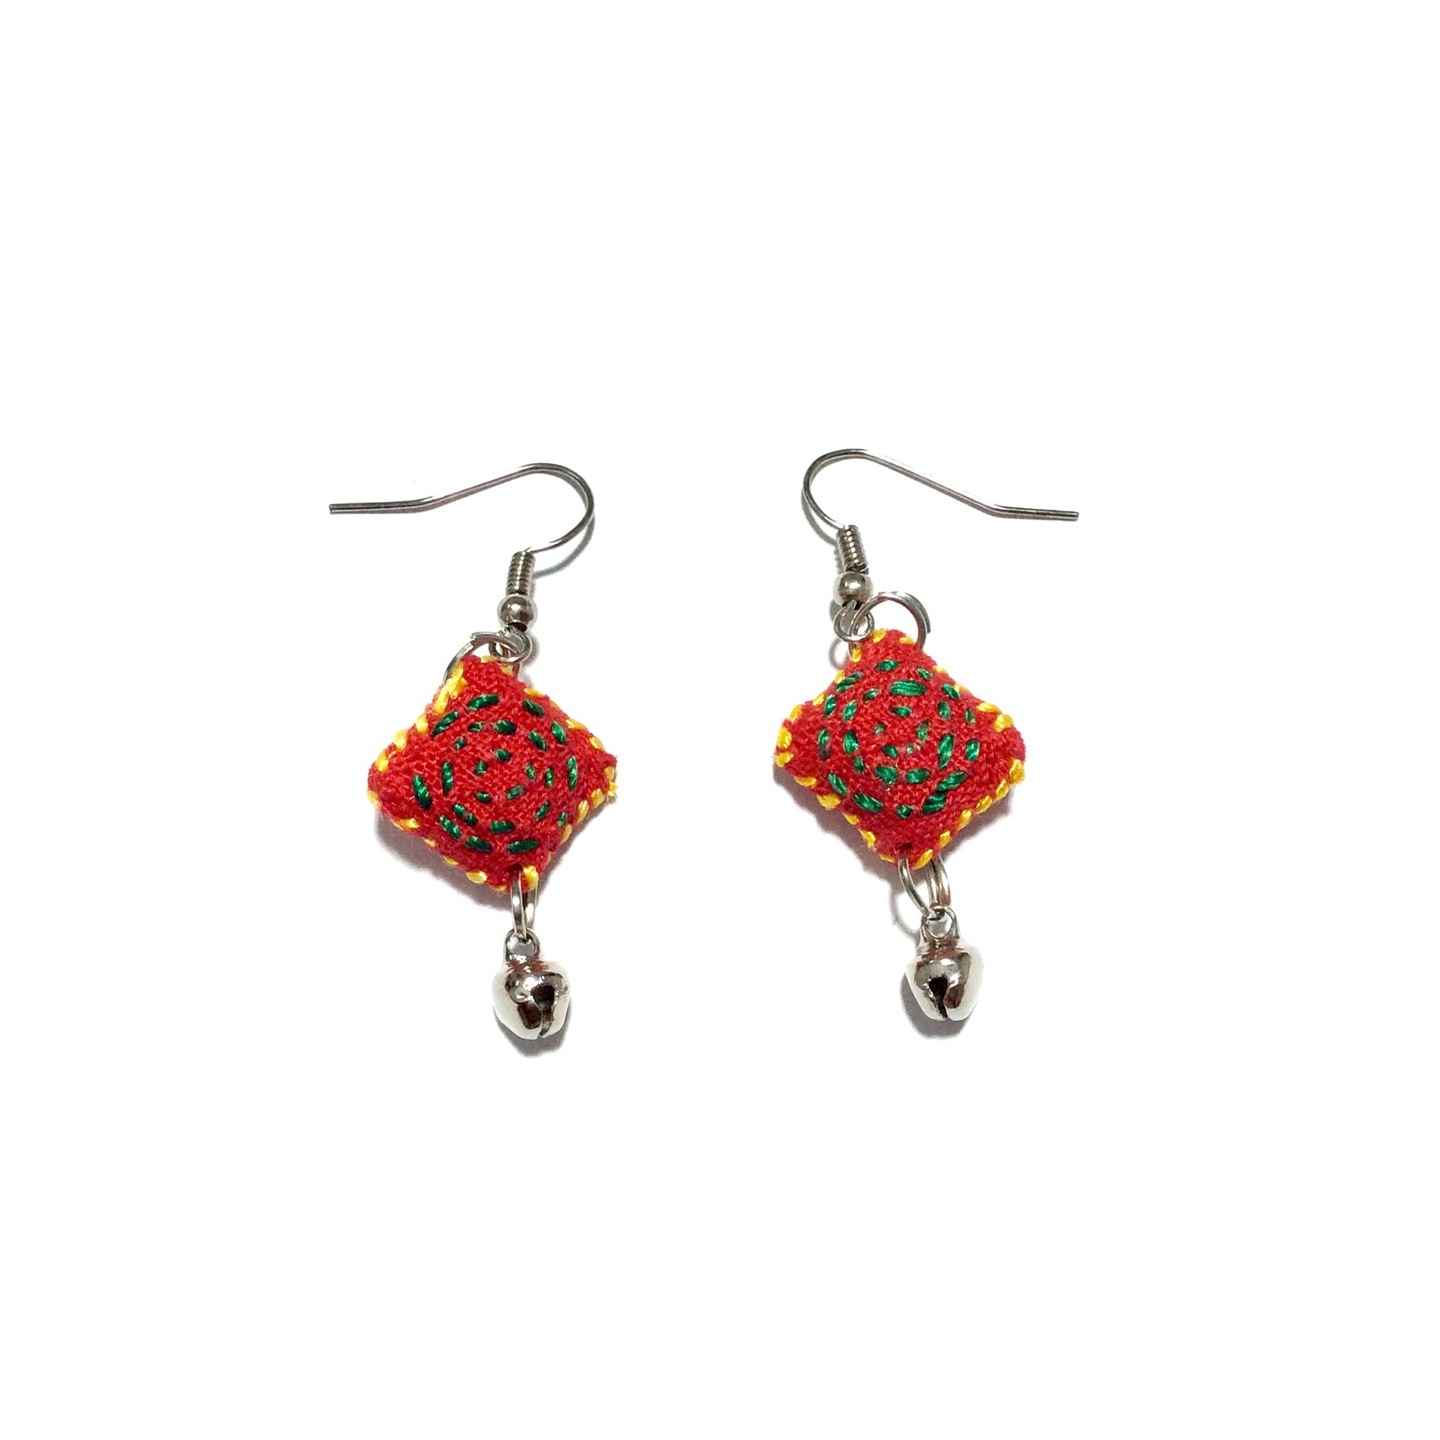 Handcrafted Fabric Embroidered Earrings